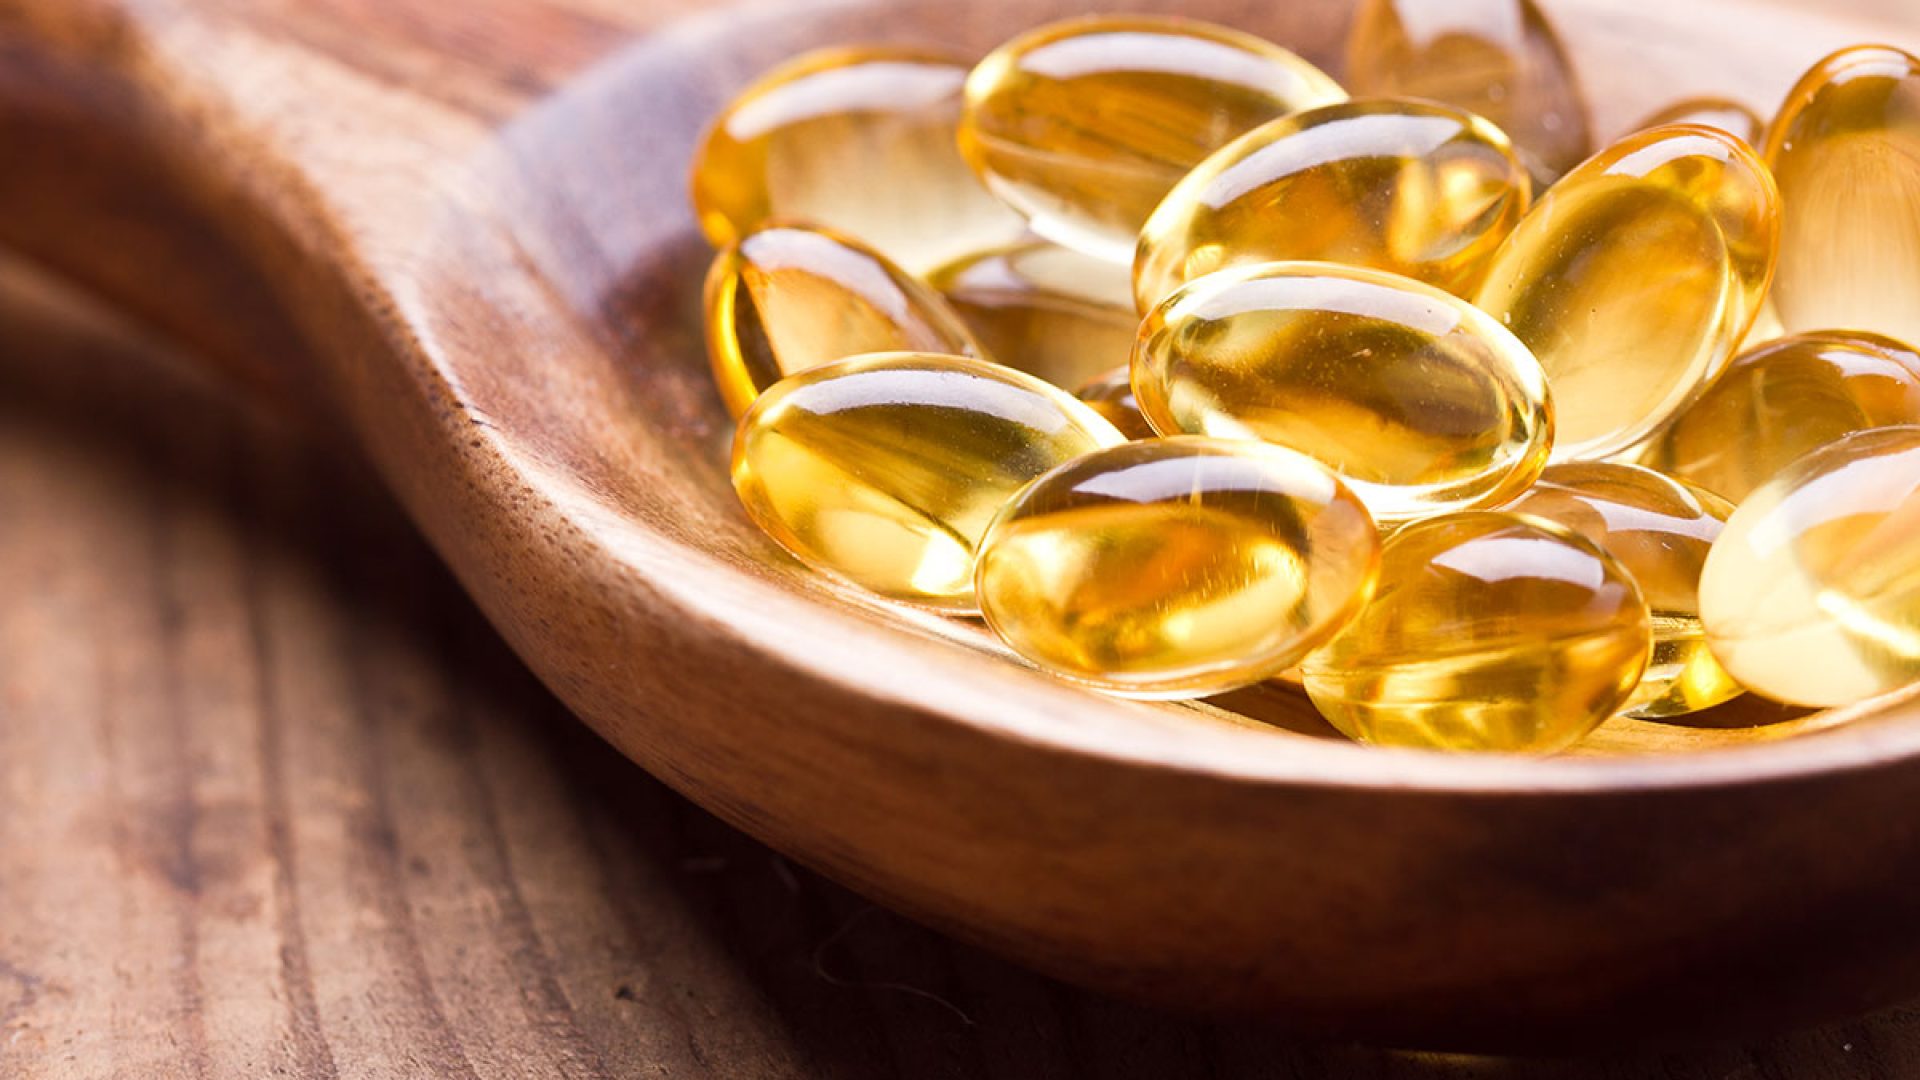 The Best Supplements For Memory Loss, Say Dietitians